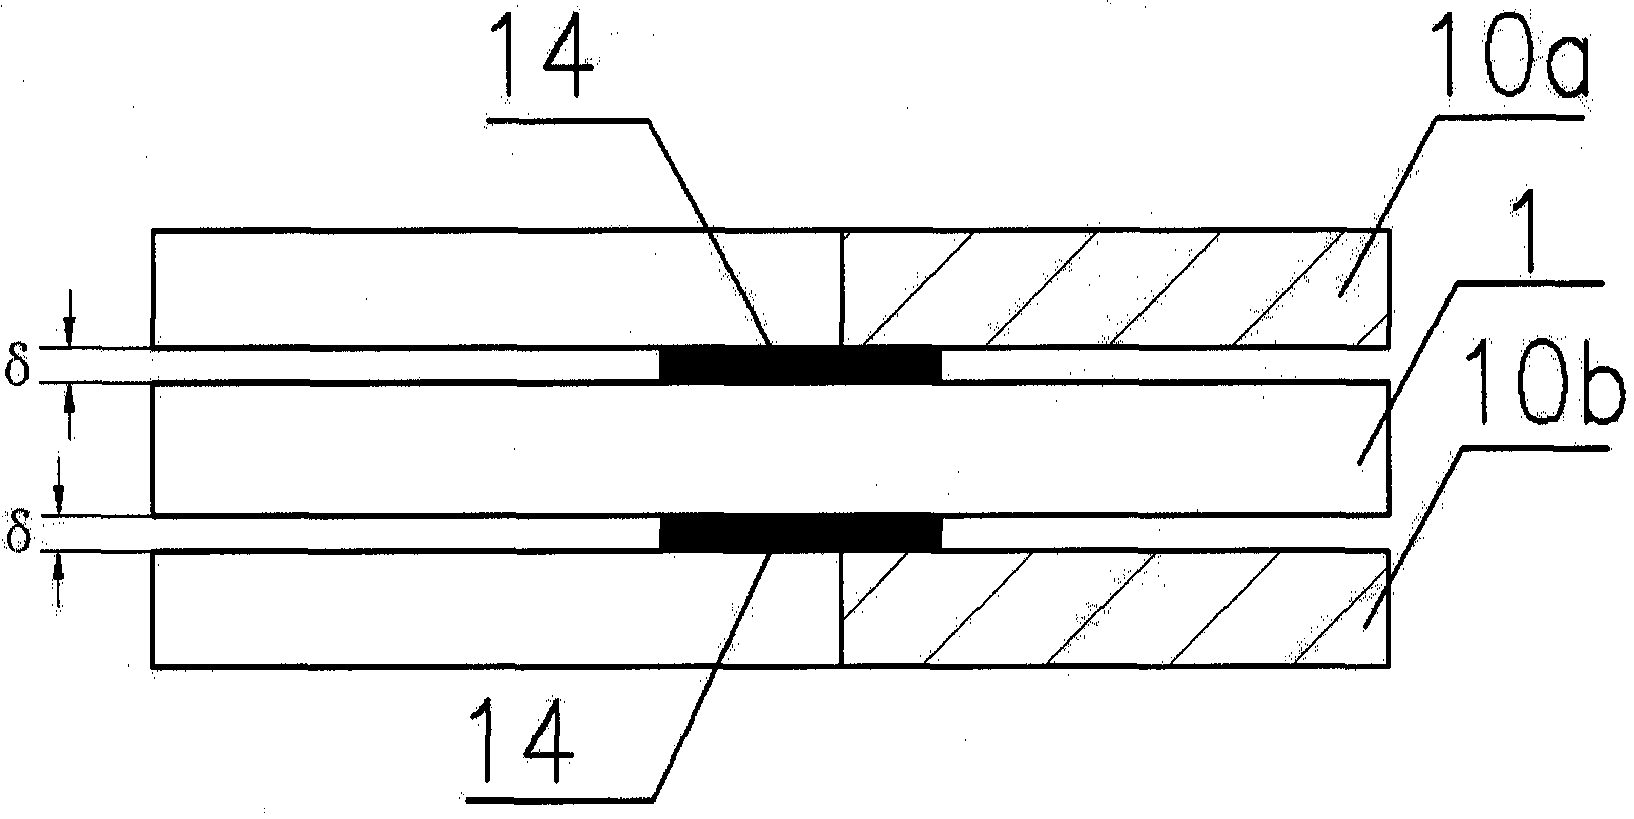 A protection device and processing method for a sensitive structure of a quartz micromachined accelerometer